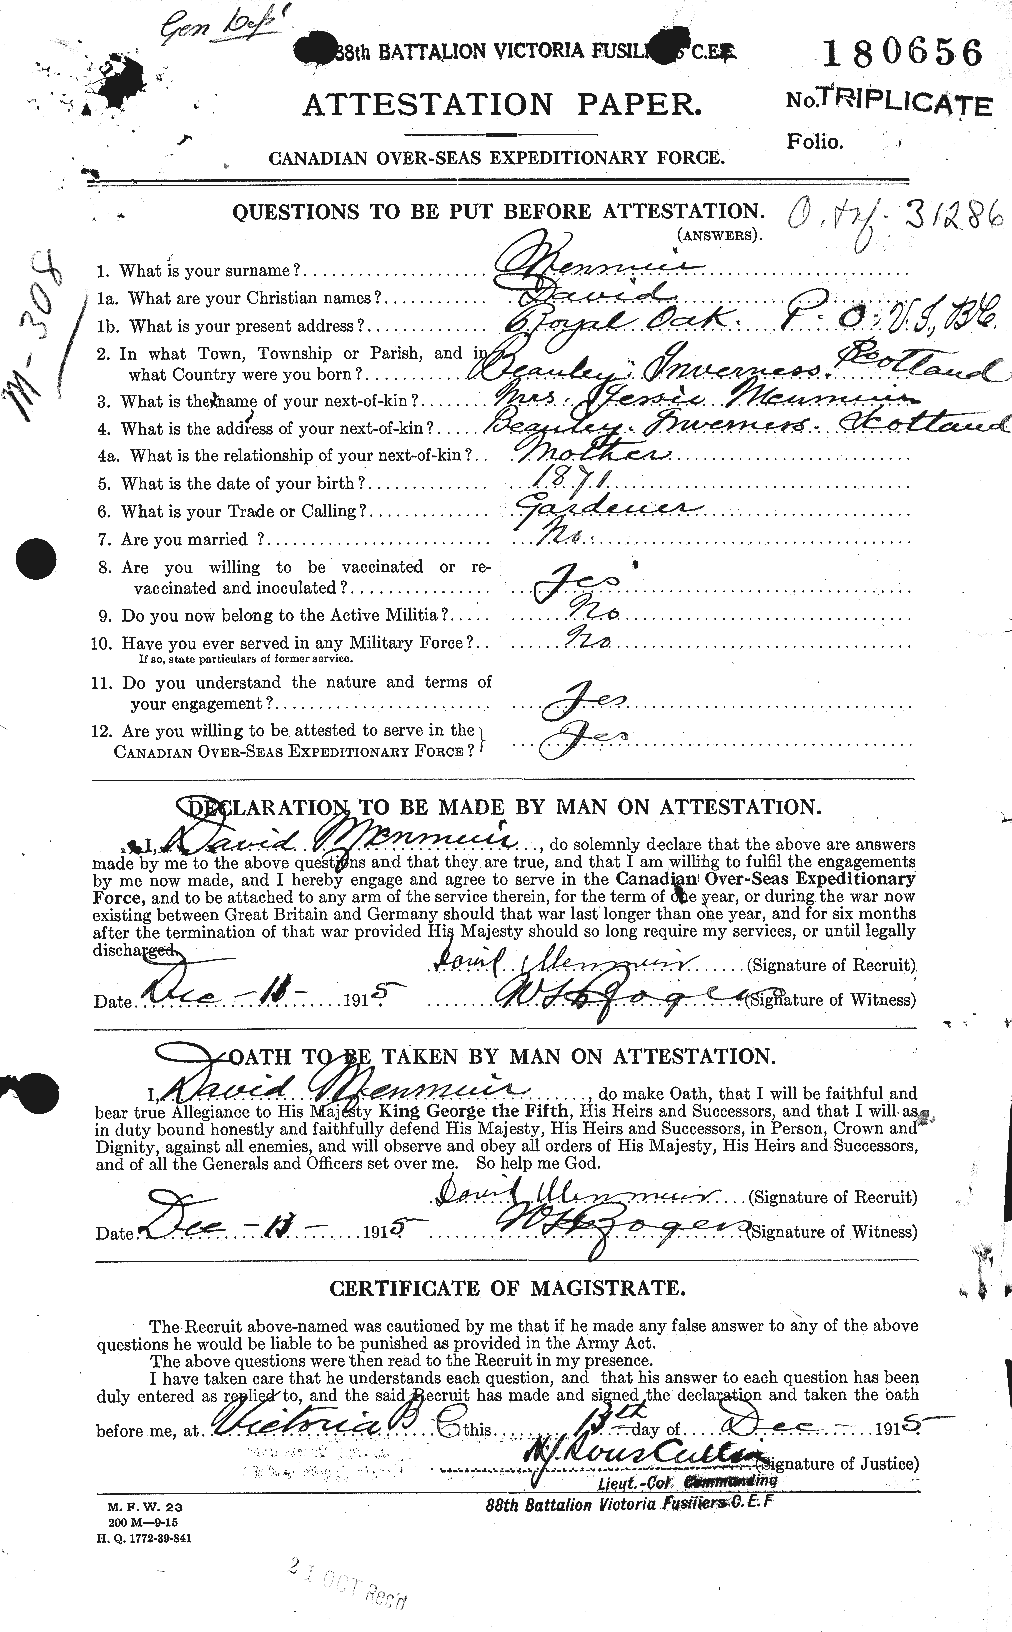 Personnel Records of the First World War - CEF 491652a